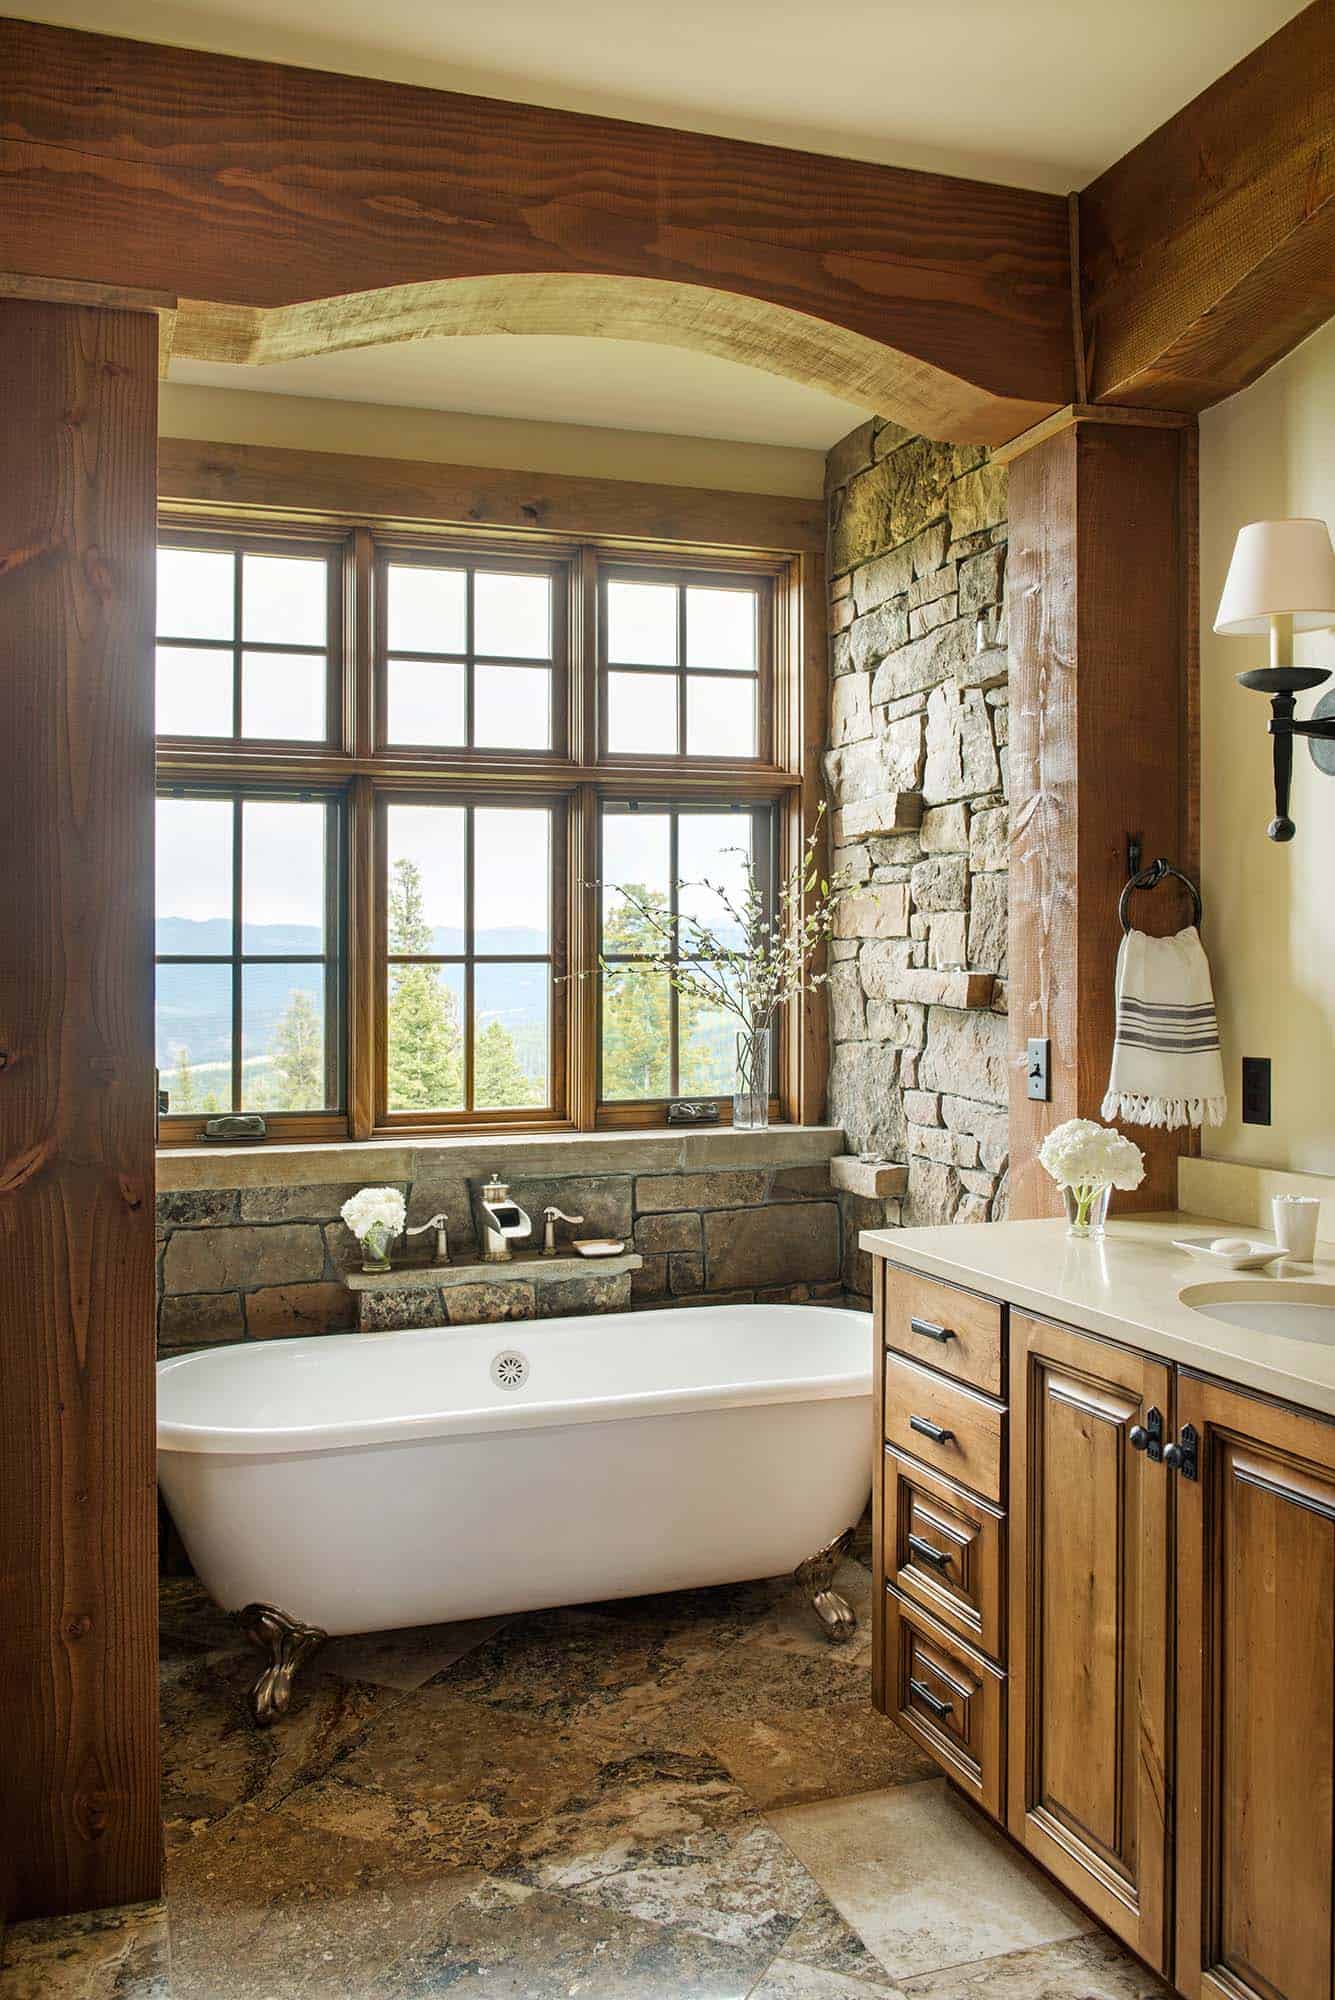 rustic bathroom with a vanity and freestanding tub in front of windows